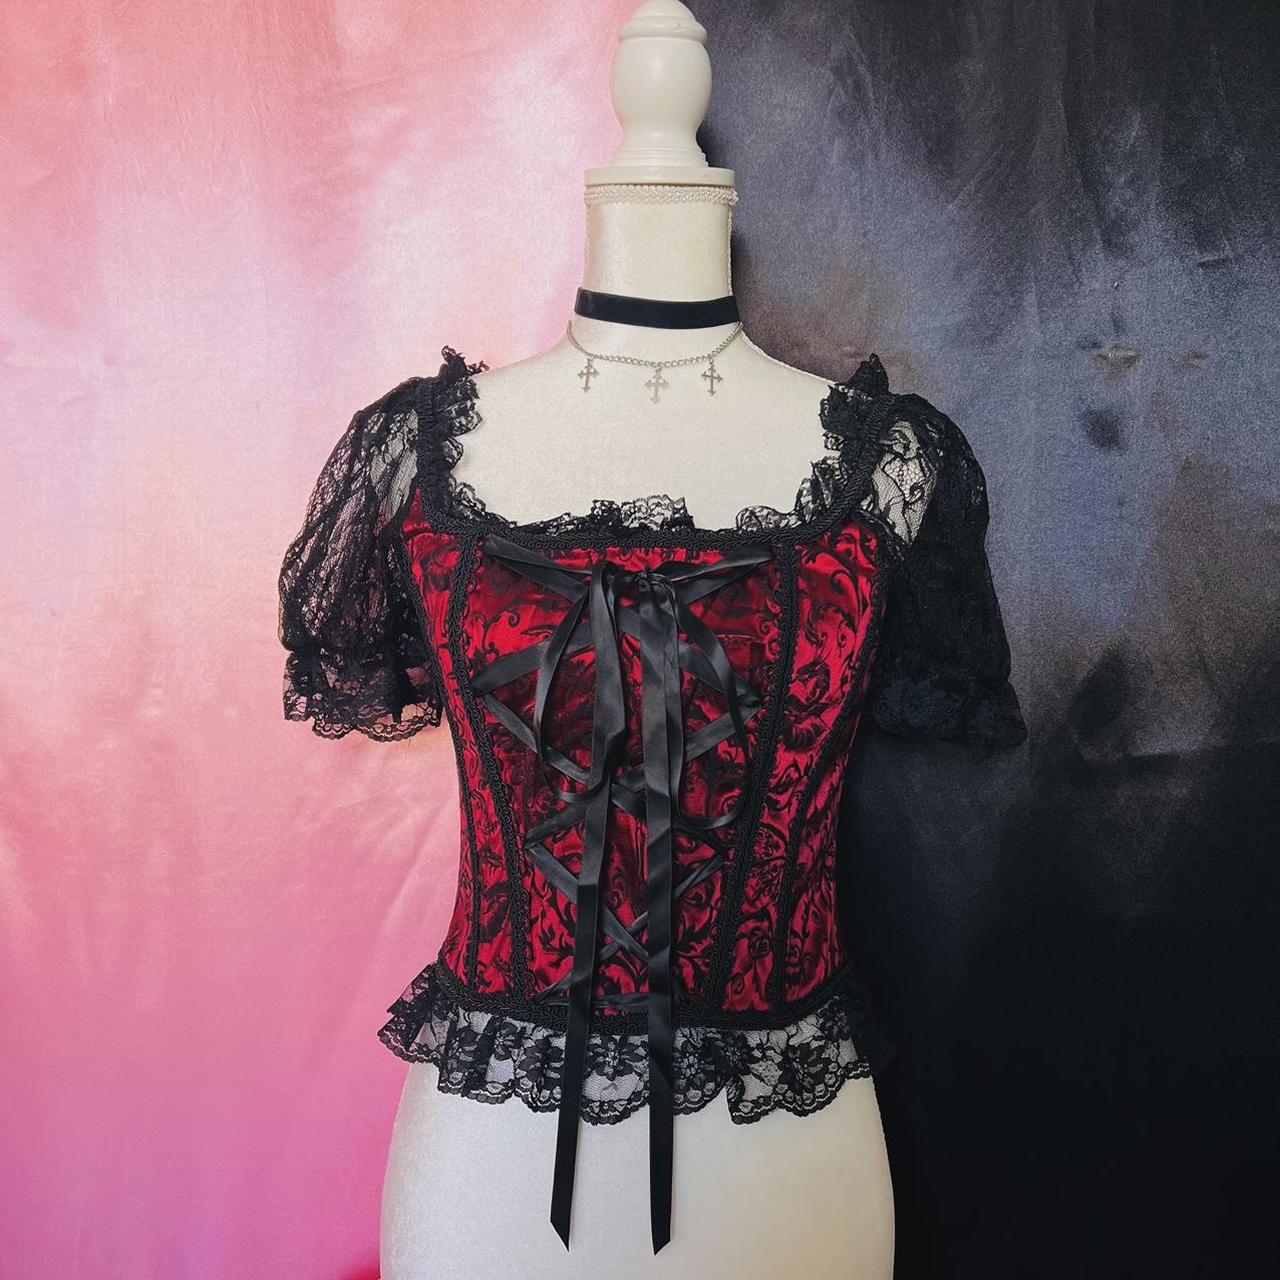 Gothic Black And Red Bustier Corset Lace-up Top Drawstring, 59% OFF